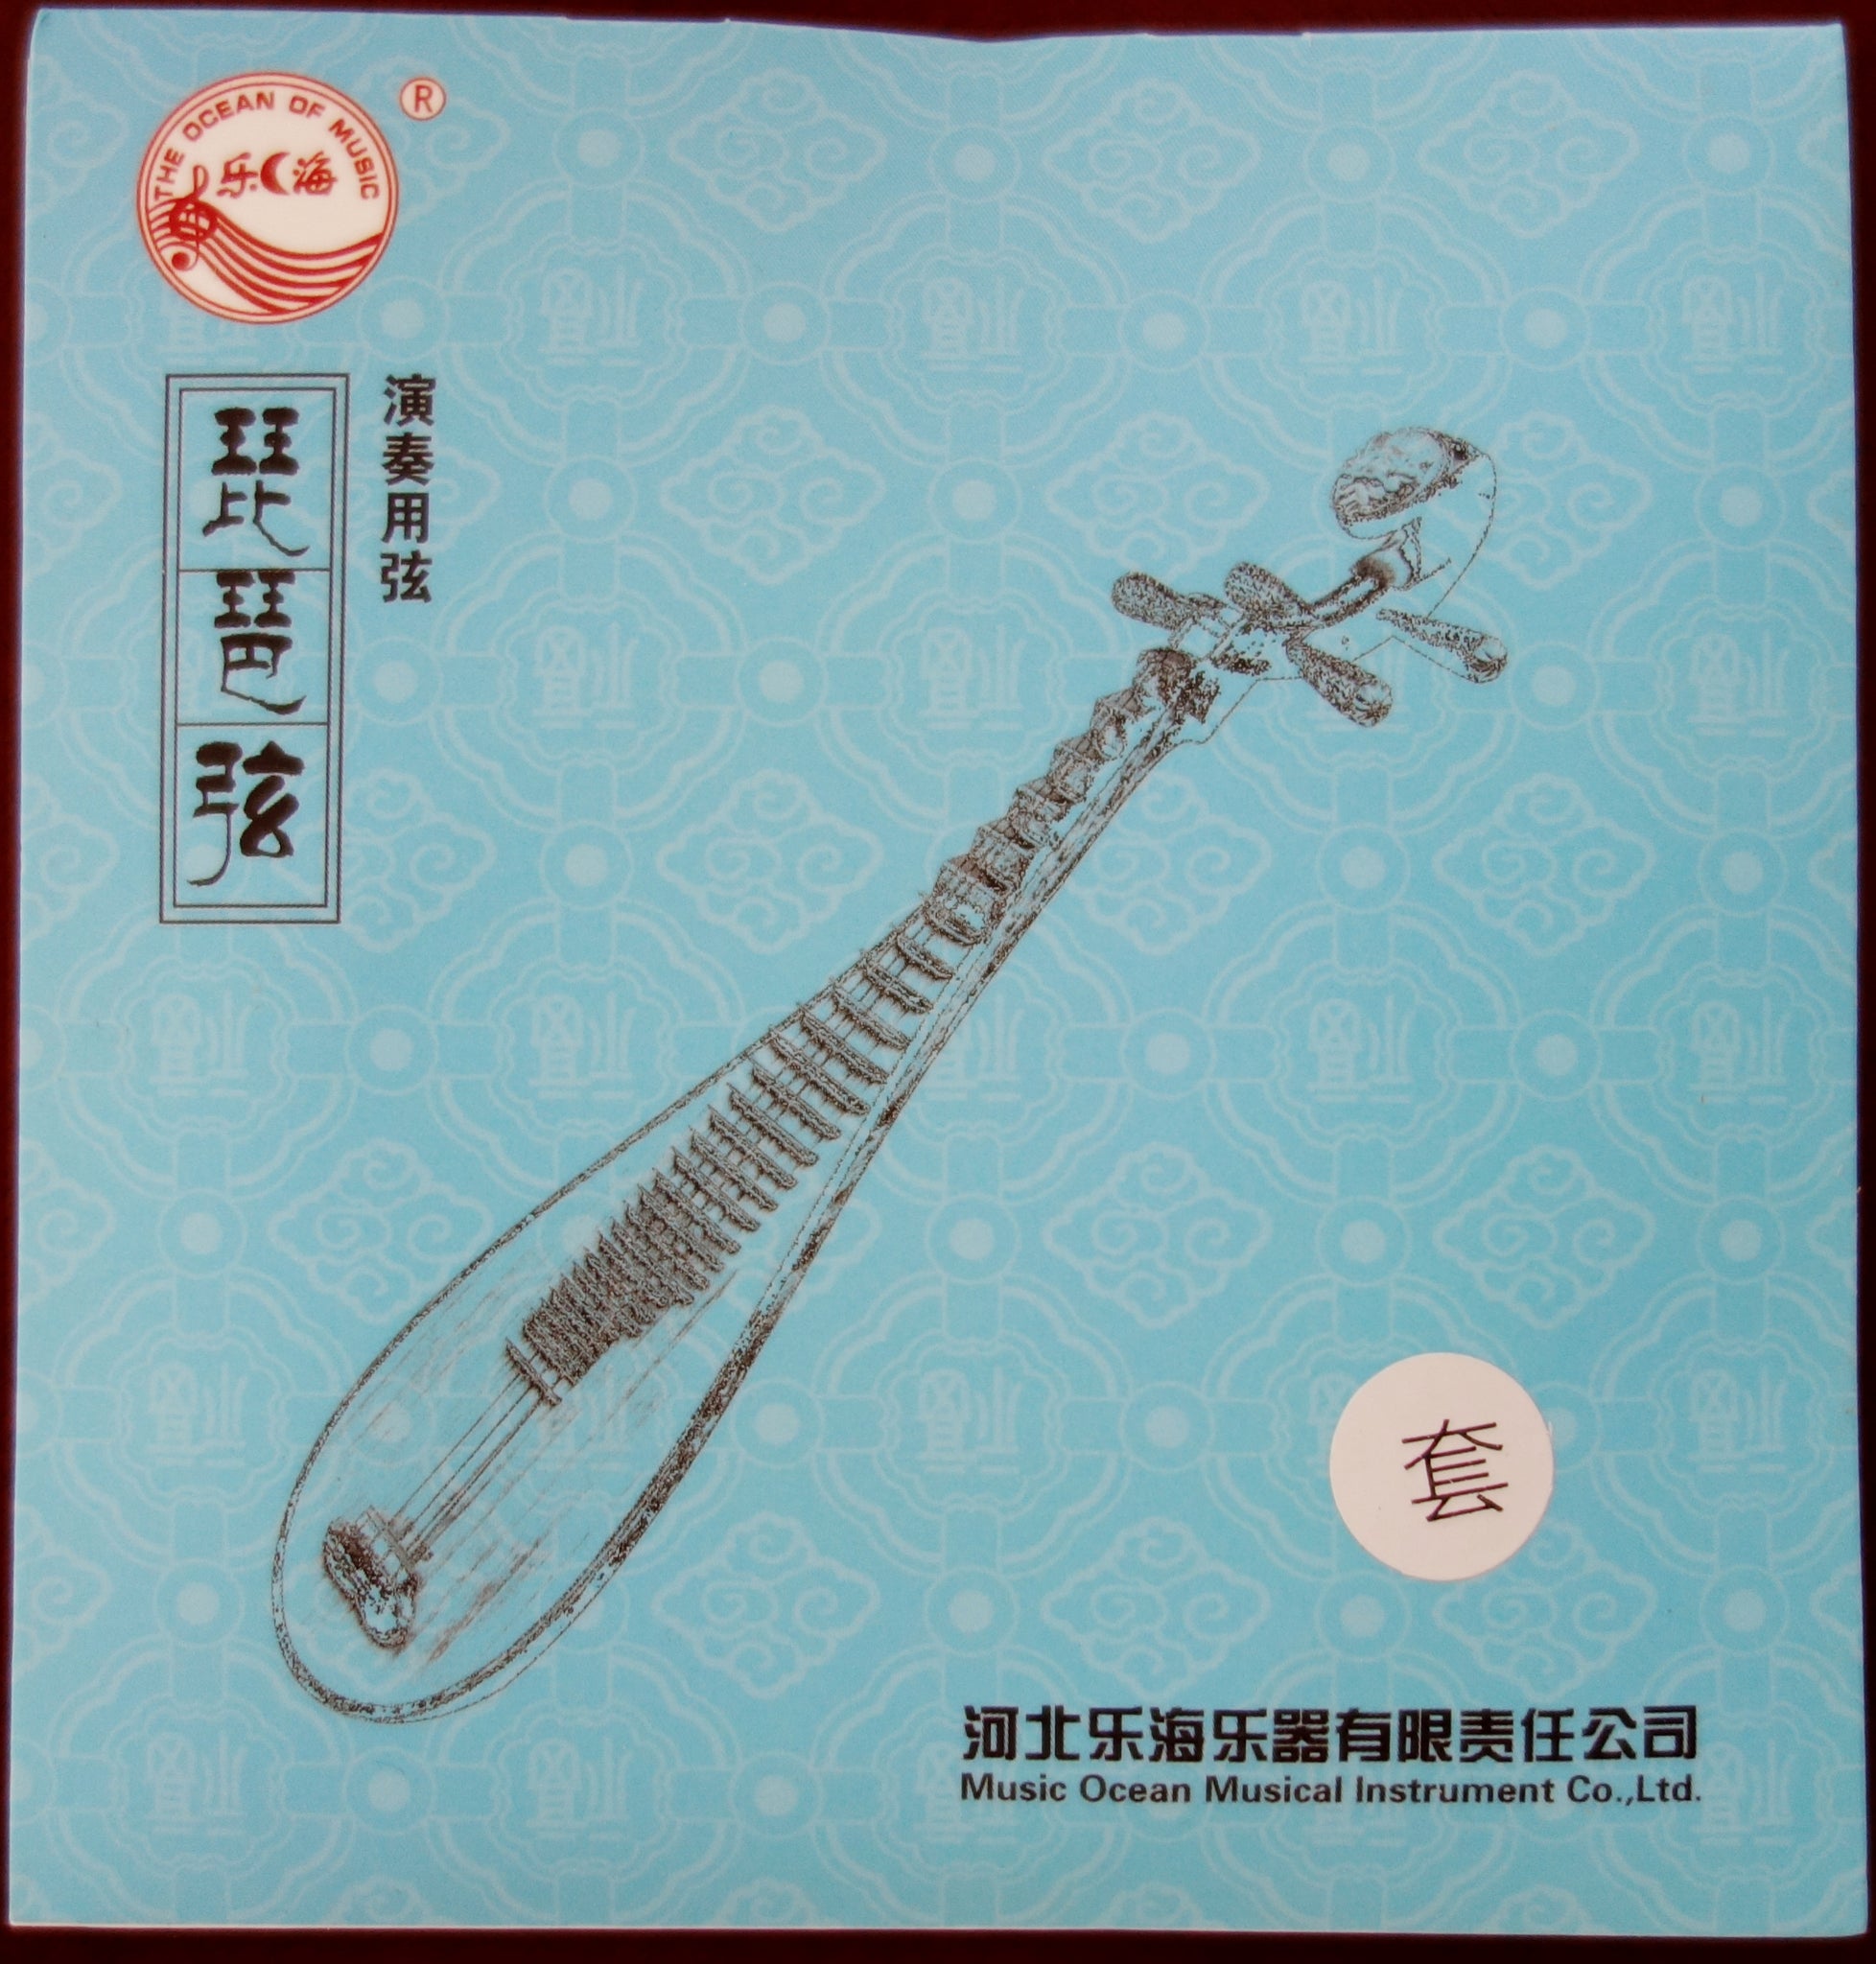 Strings for Pipa, whole set (4 pieces), Concert Grade 琵琶弦 一套（4根), 演奏级Free shipping